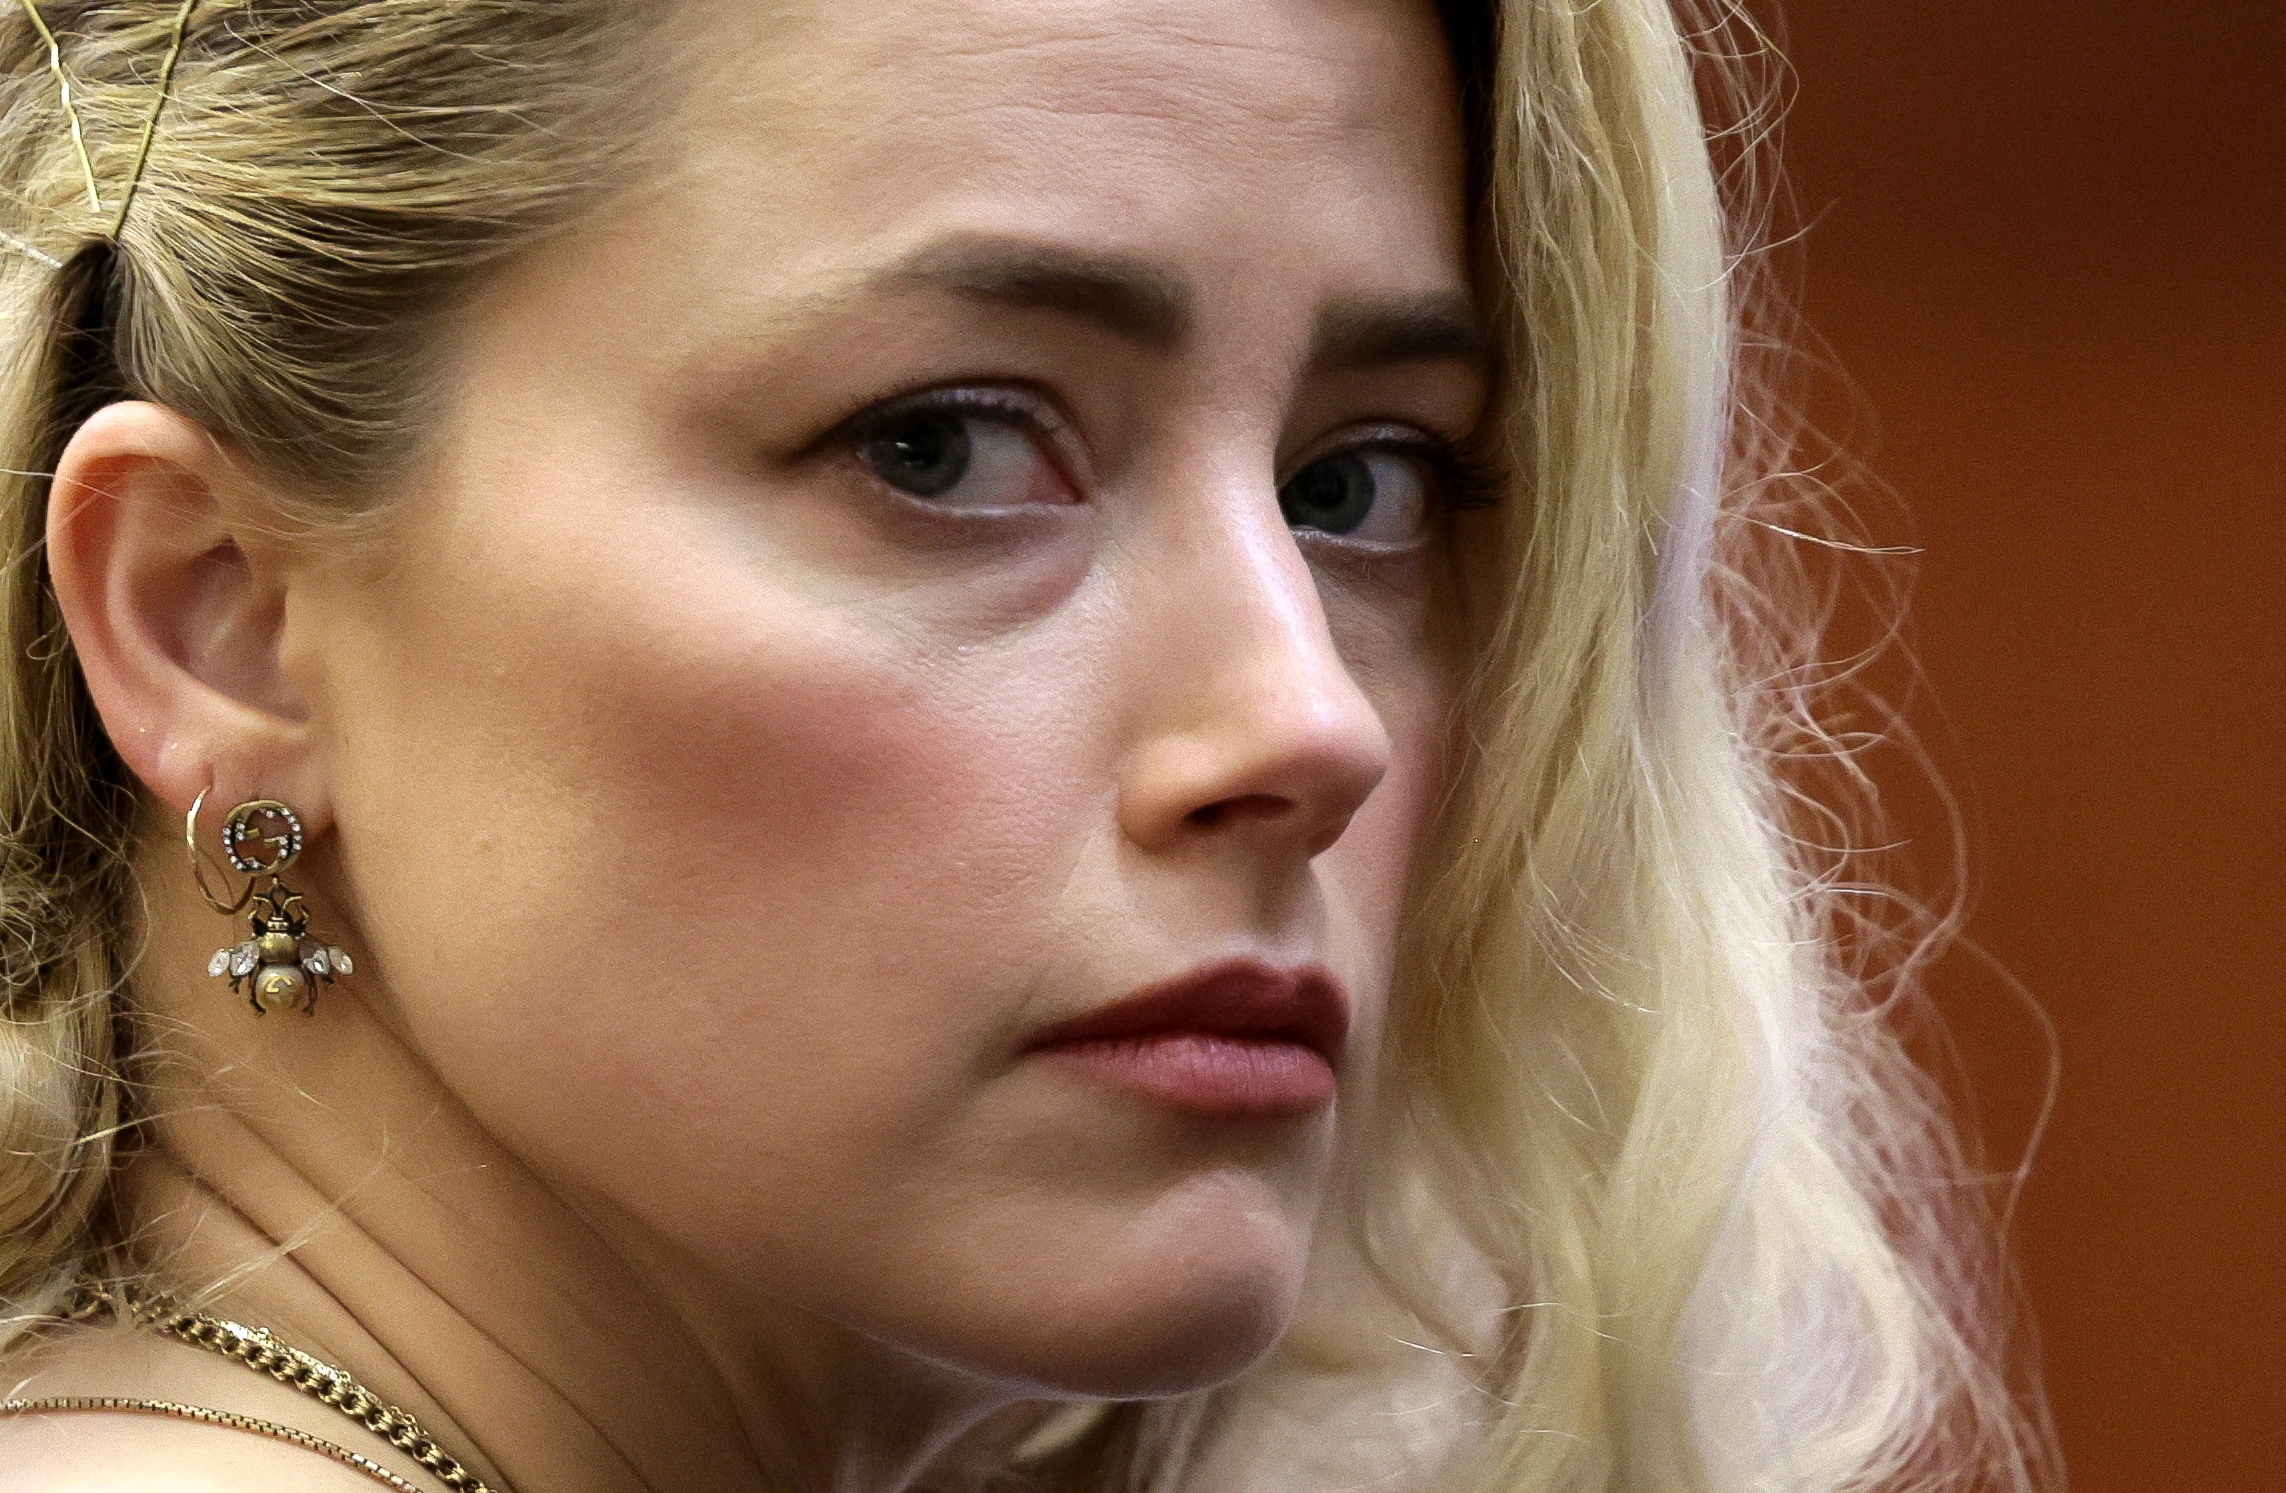 File photo: Actress Amber Heard awaits the jury's verdict in the civil libel trial Depp v.  Heard in Fairfax, Virginia, United States, on June 1, 2022 (REUTERS / Evelyn Hockstein)